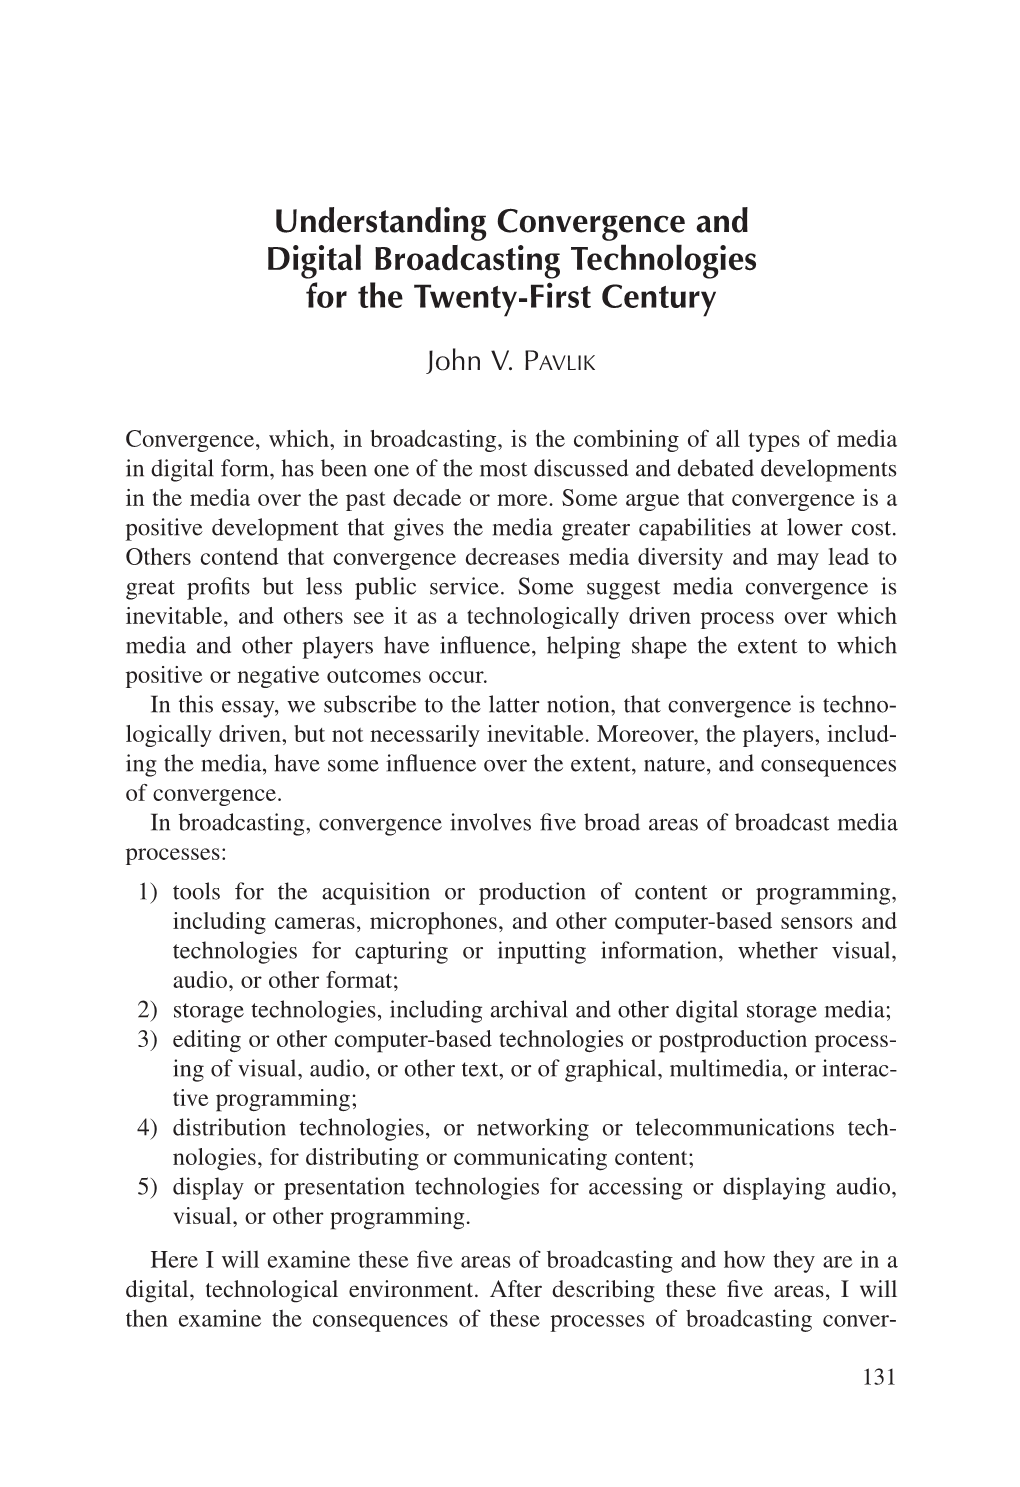 Understanding Convergence and Digital Broadcasting Technologies for the Twenty-First Century